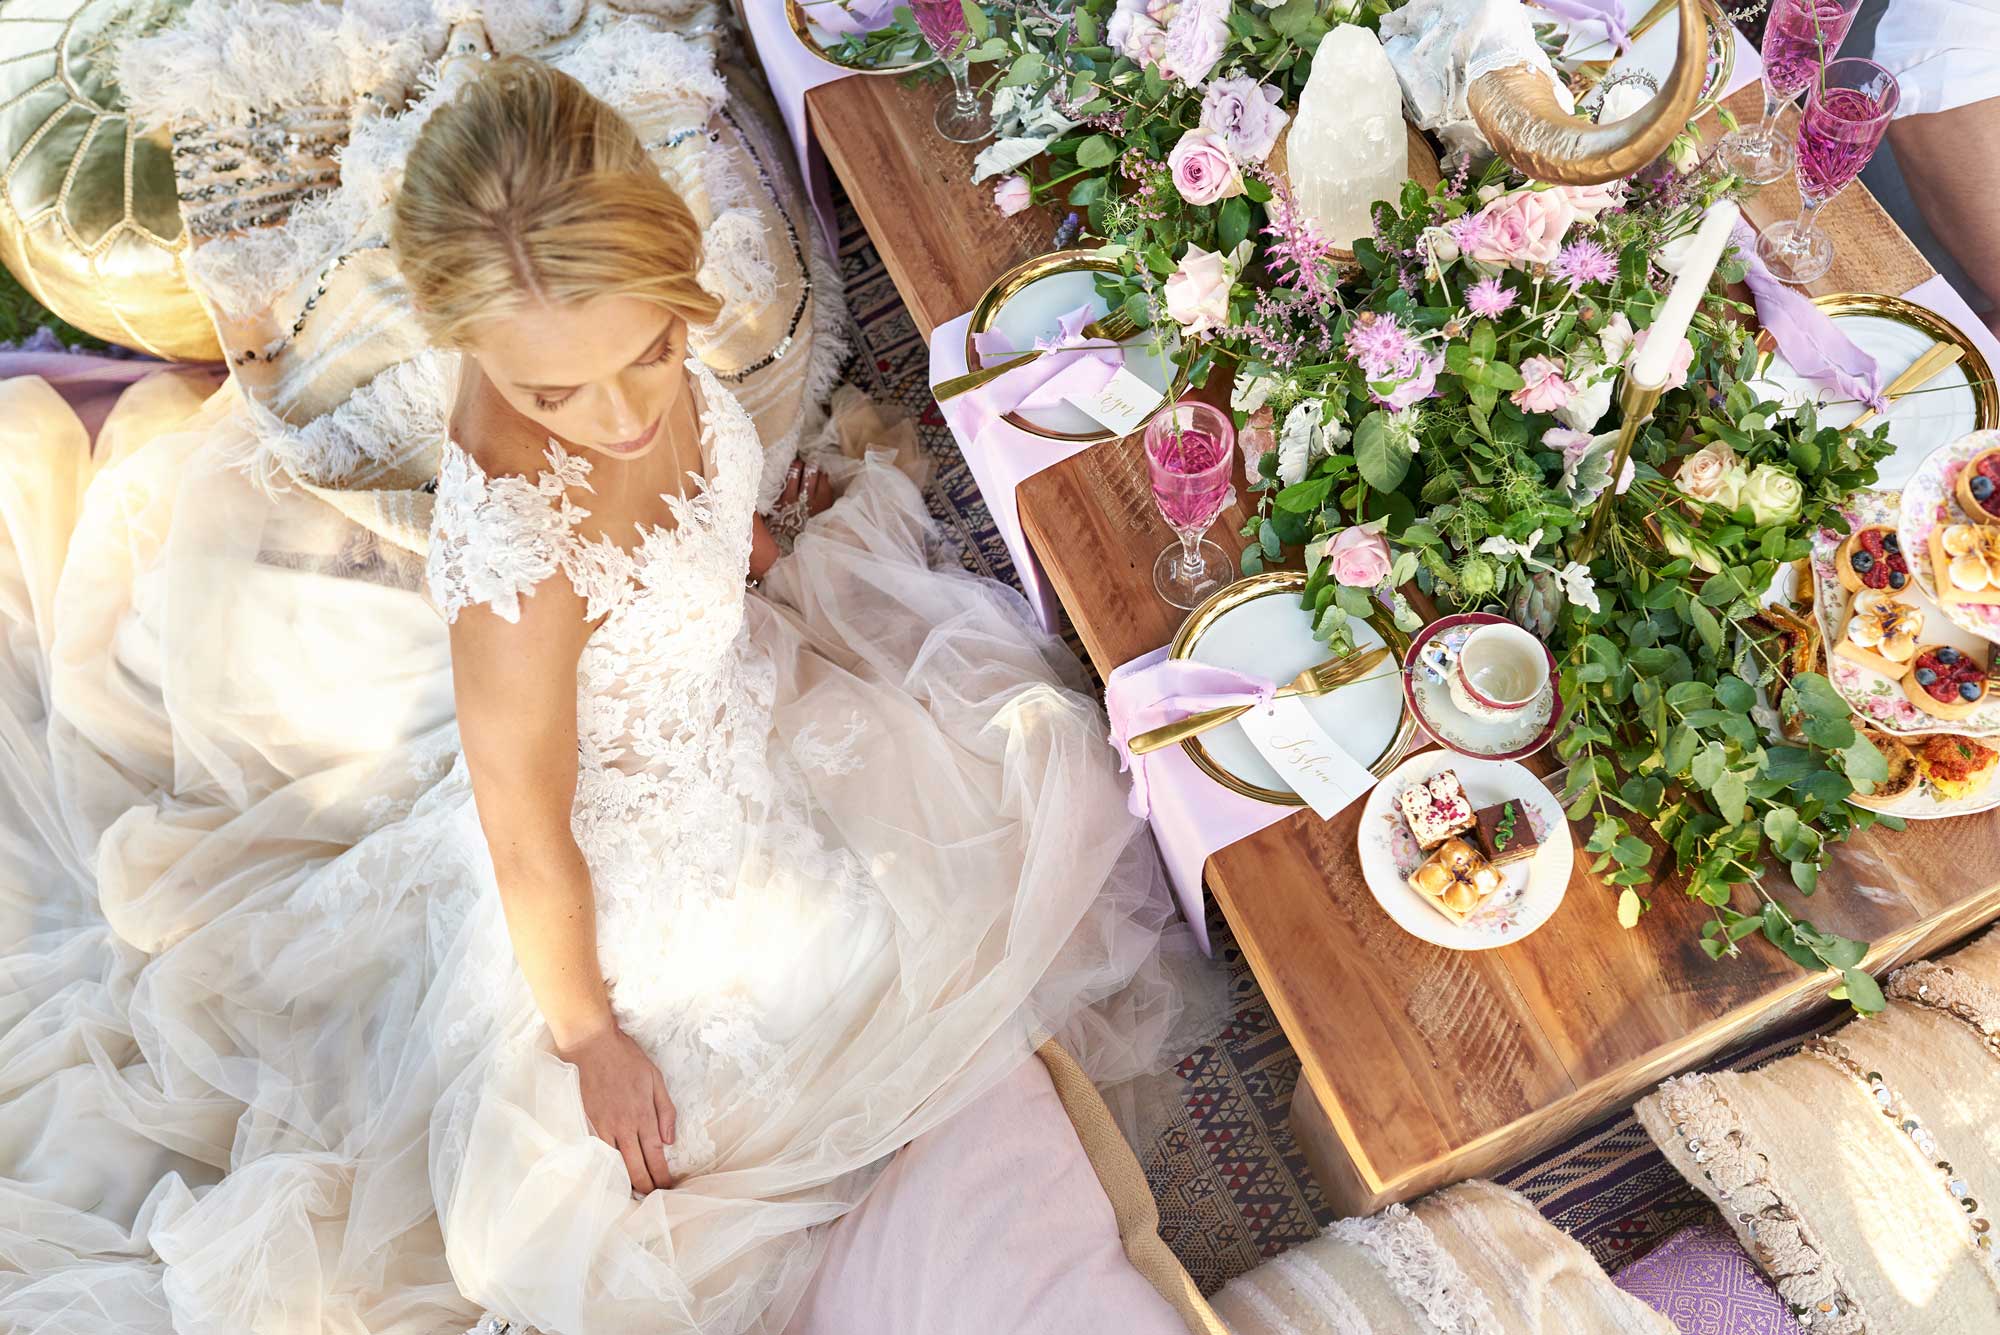 Beautifully Bohemian - Inspiration for the free-spirited bride